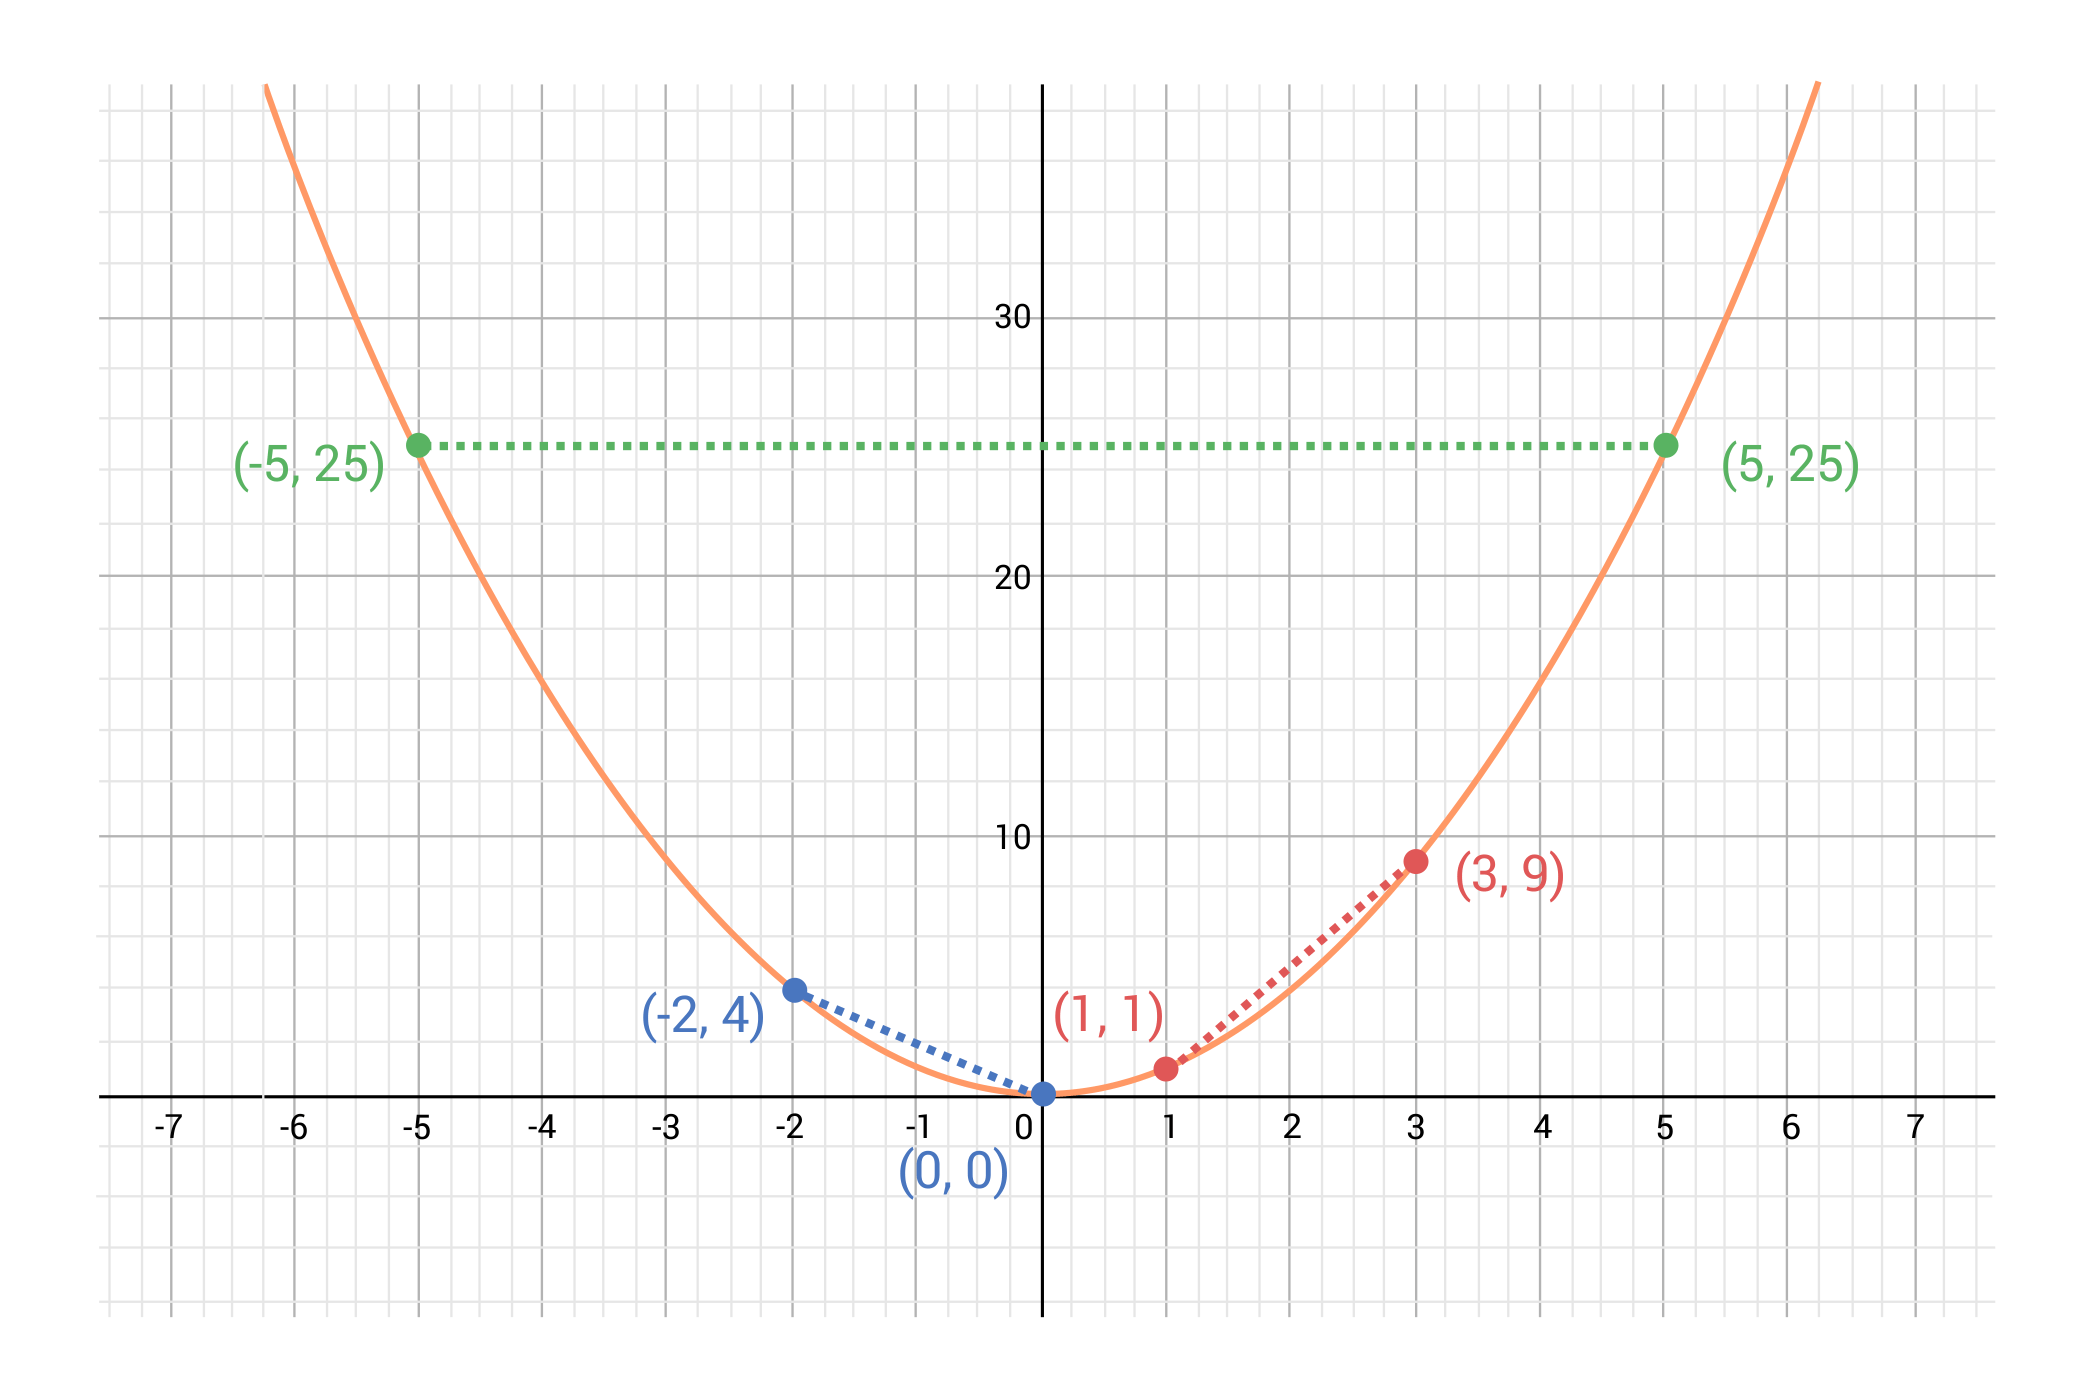 coordinate plane, orange parabola graphed, blue points at (negative 2, 4) and (0, 0) with a dashed blue line segment connecting those points, red points at (1, 1) and (3, 9) with a dashed red line segment connecting those points, green points at (negative 5, 25) and (5, 25) with dashed green line segment connecting those points